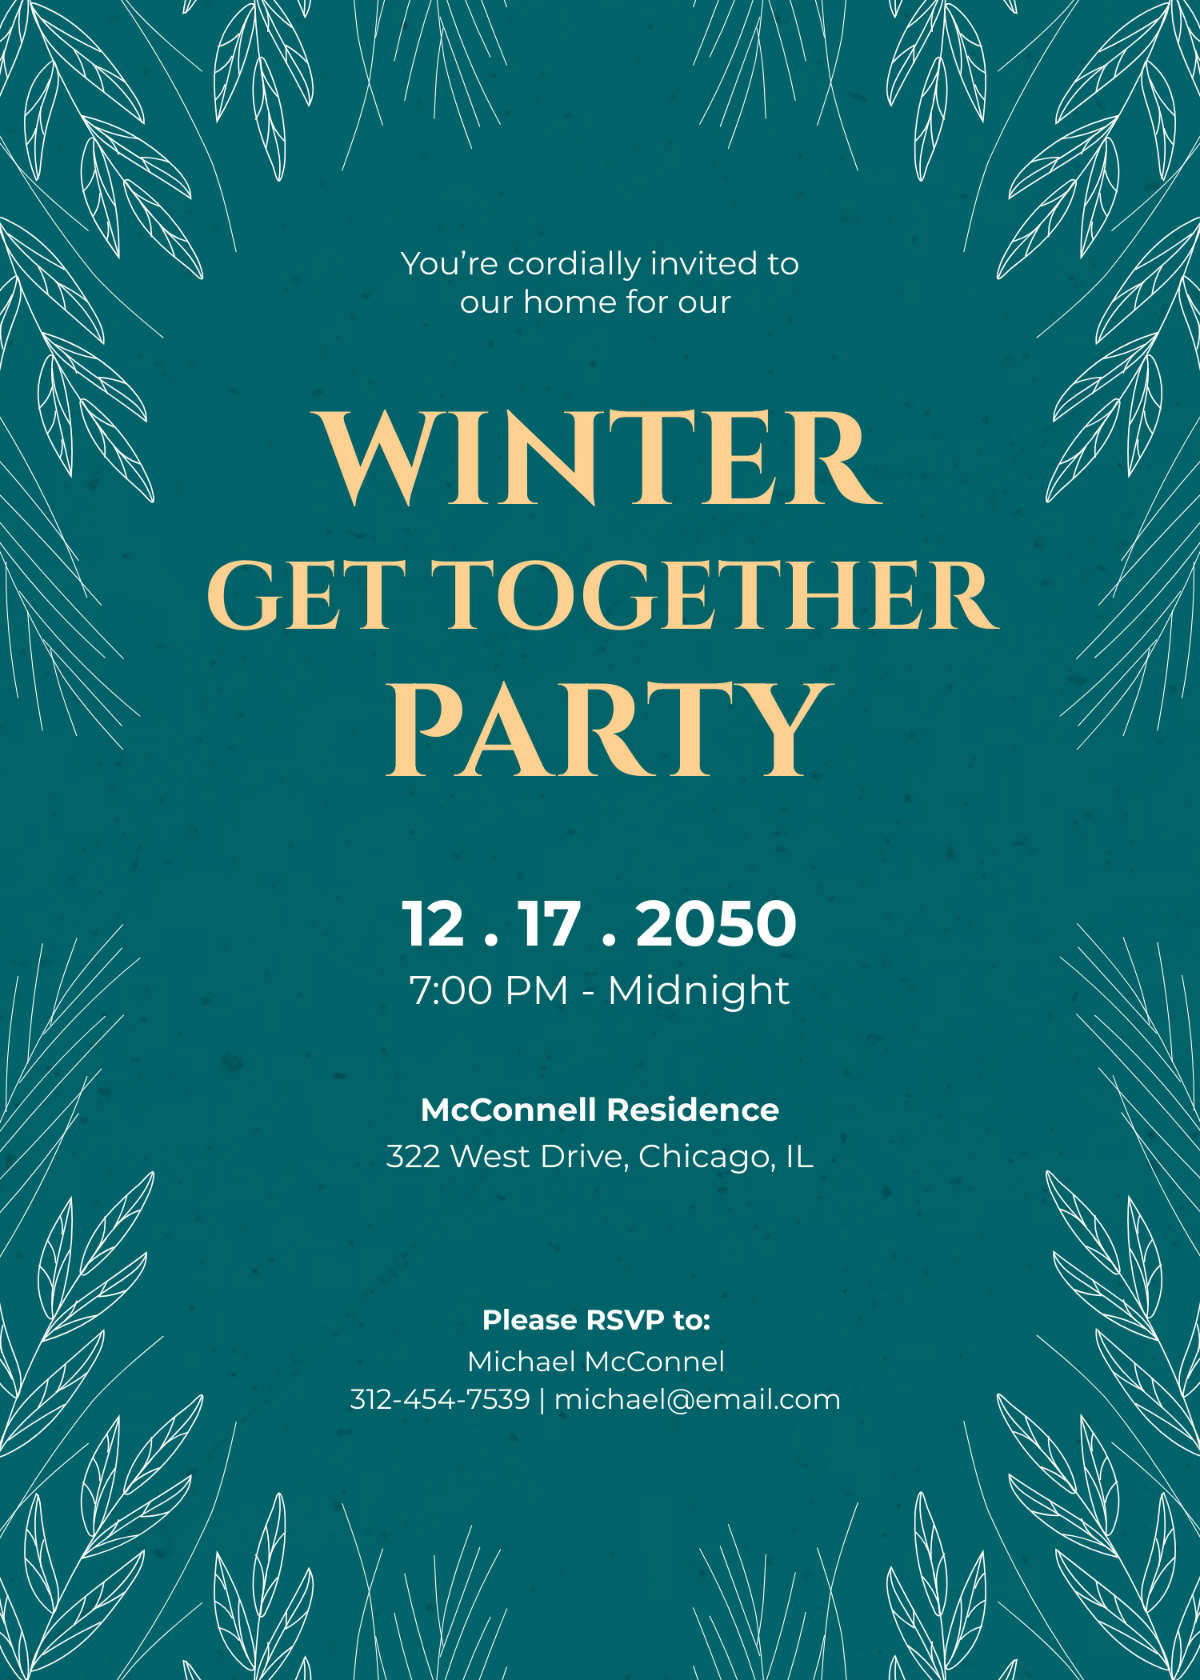 Winter Get Together Party Invitation